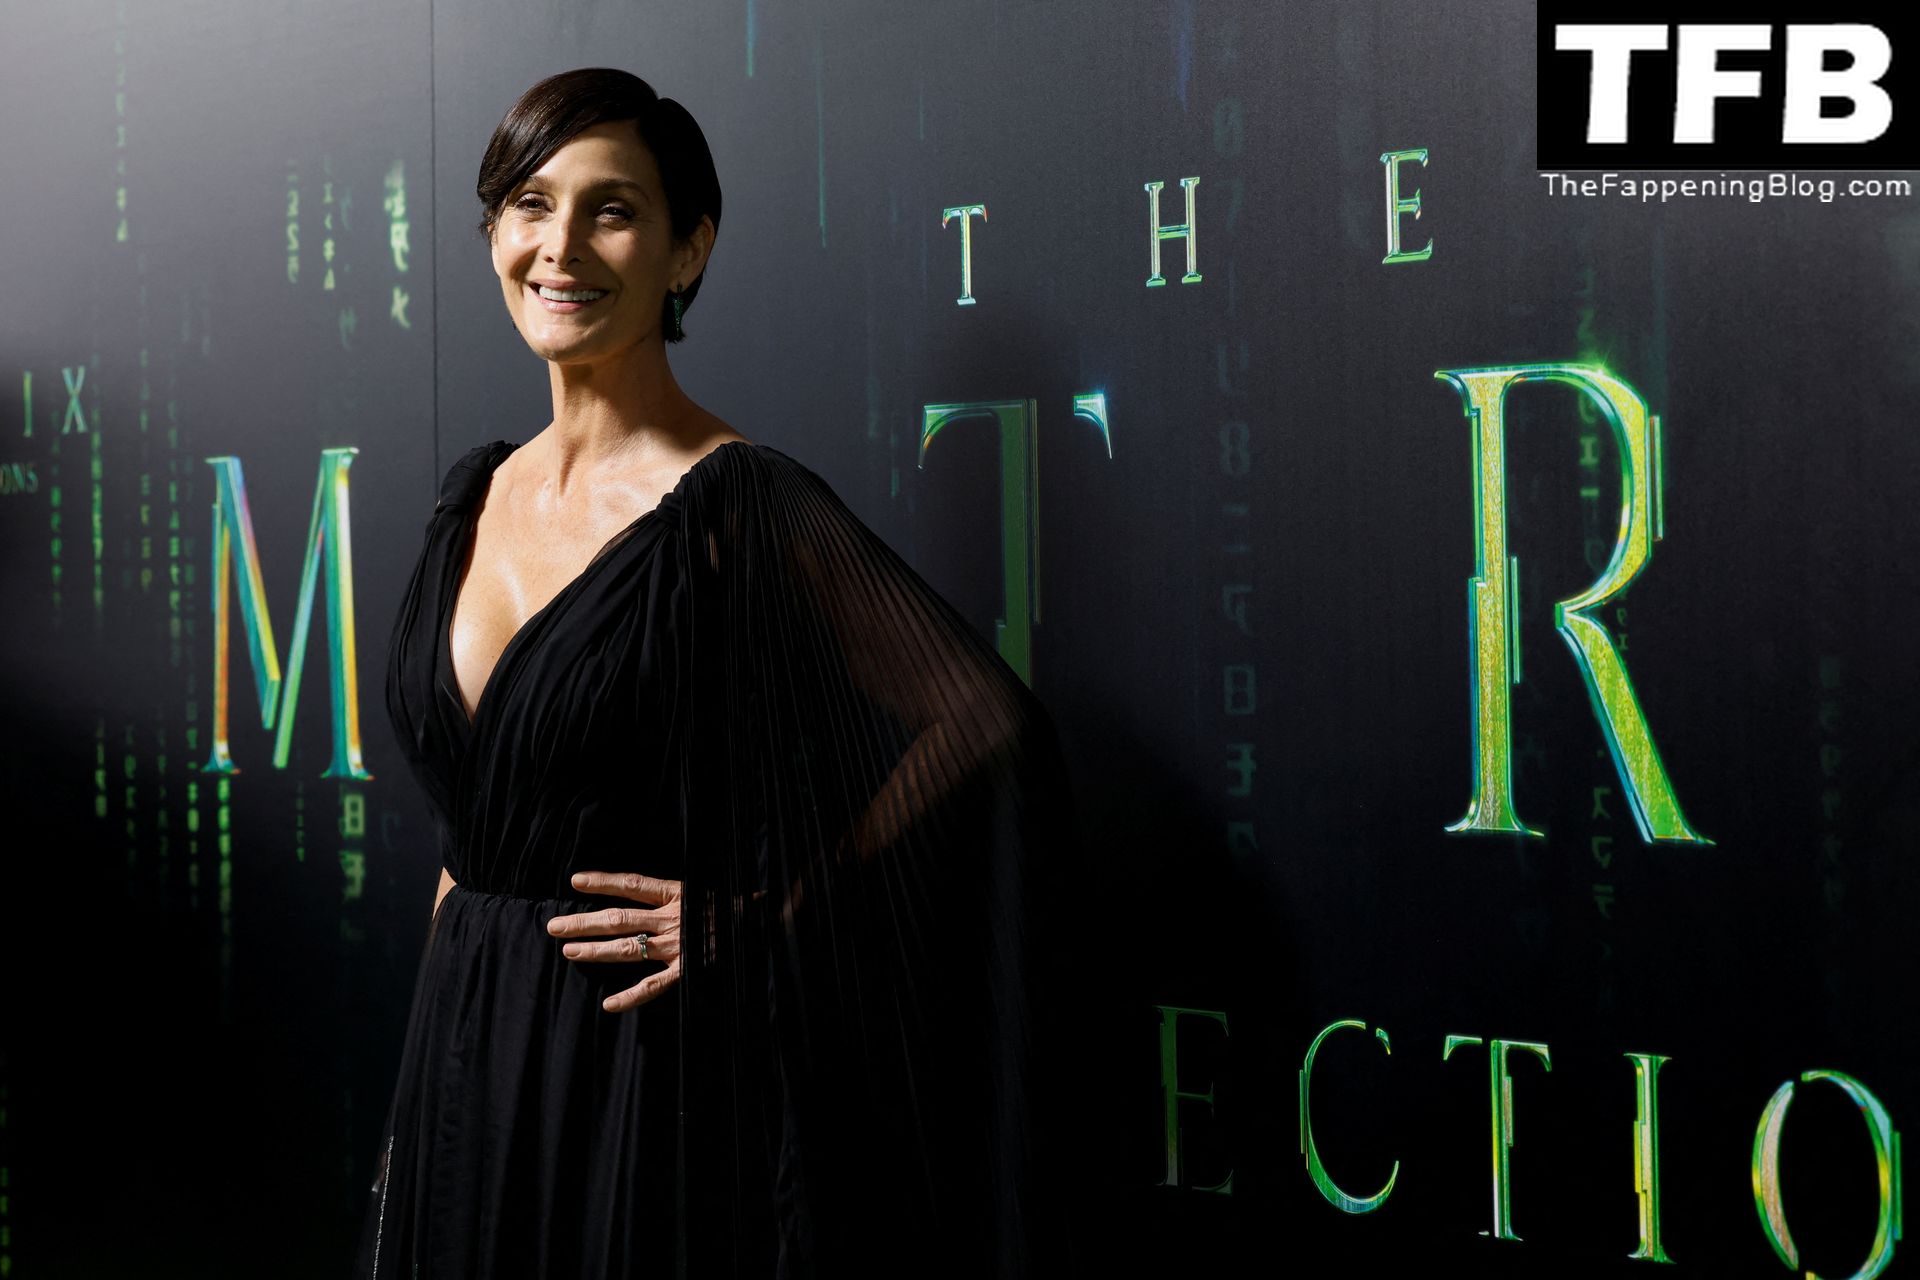 Carrie-Anne-Moss-Sexy-The-Fappening-Blog-38.jpg